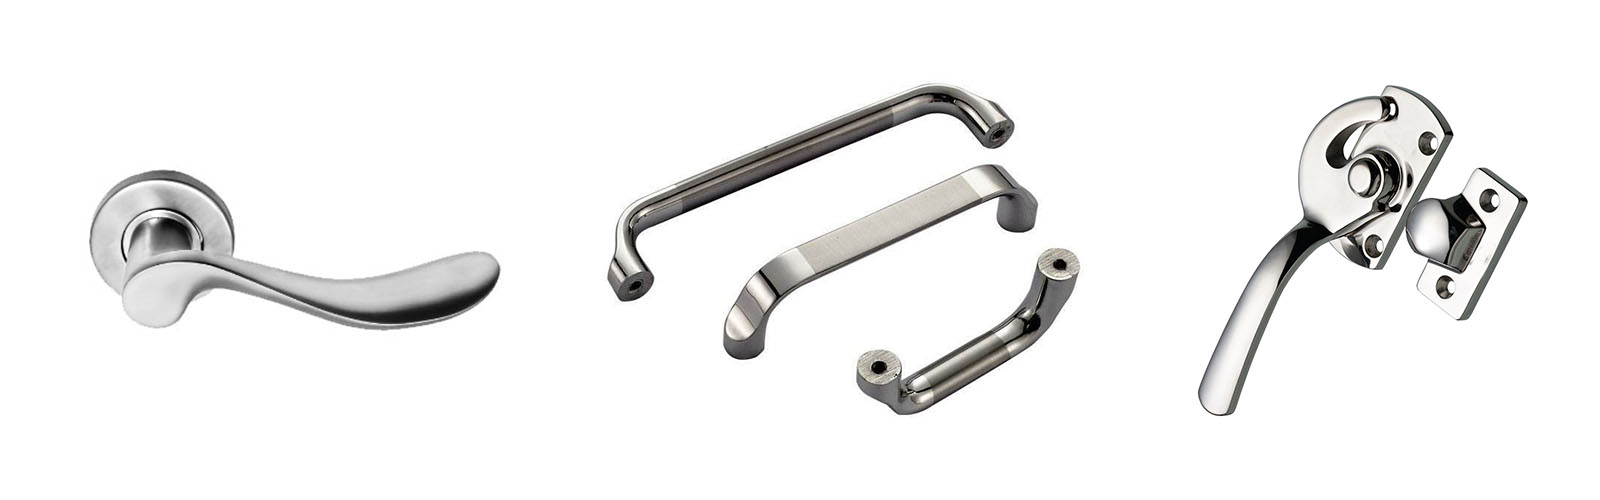 stainless-steel-investment-casting-handles